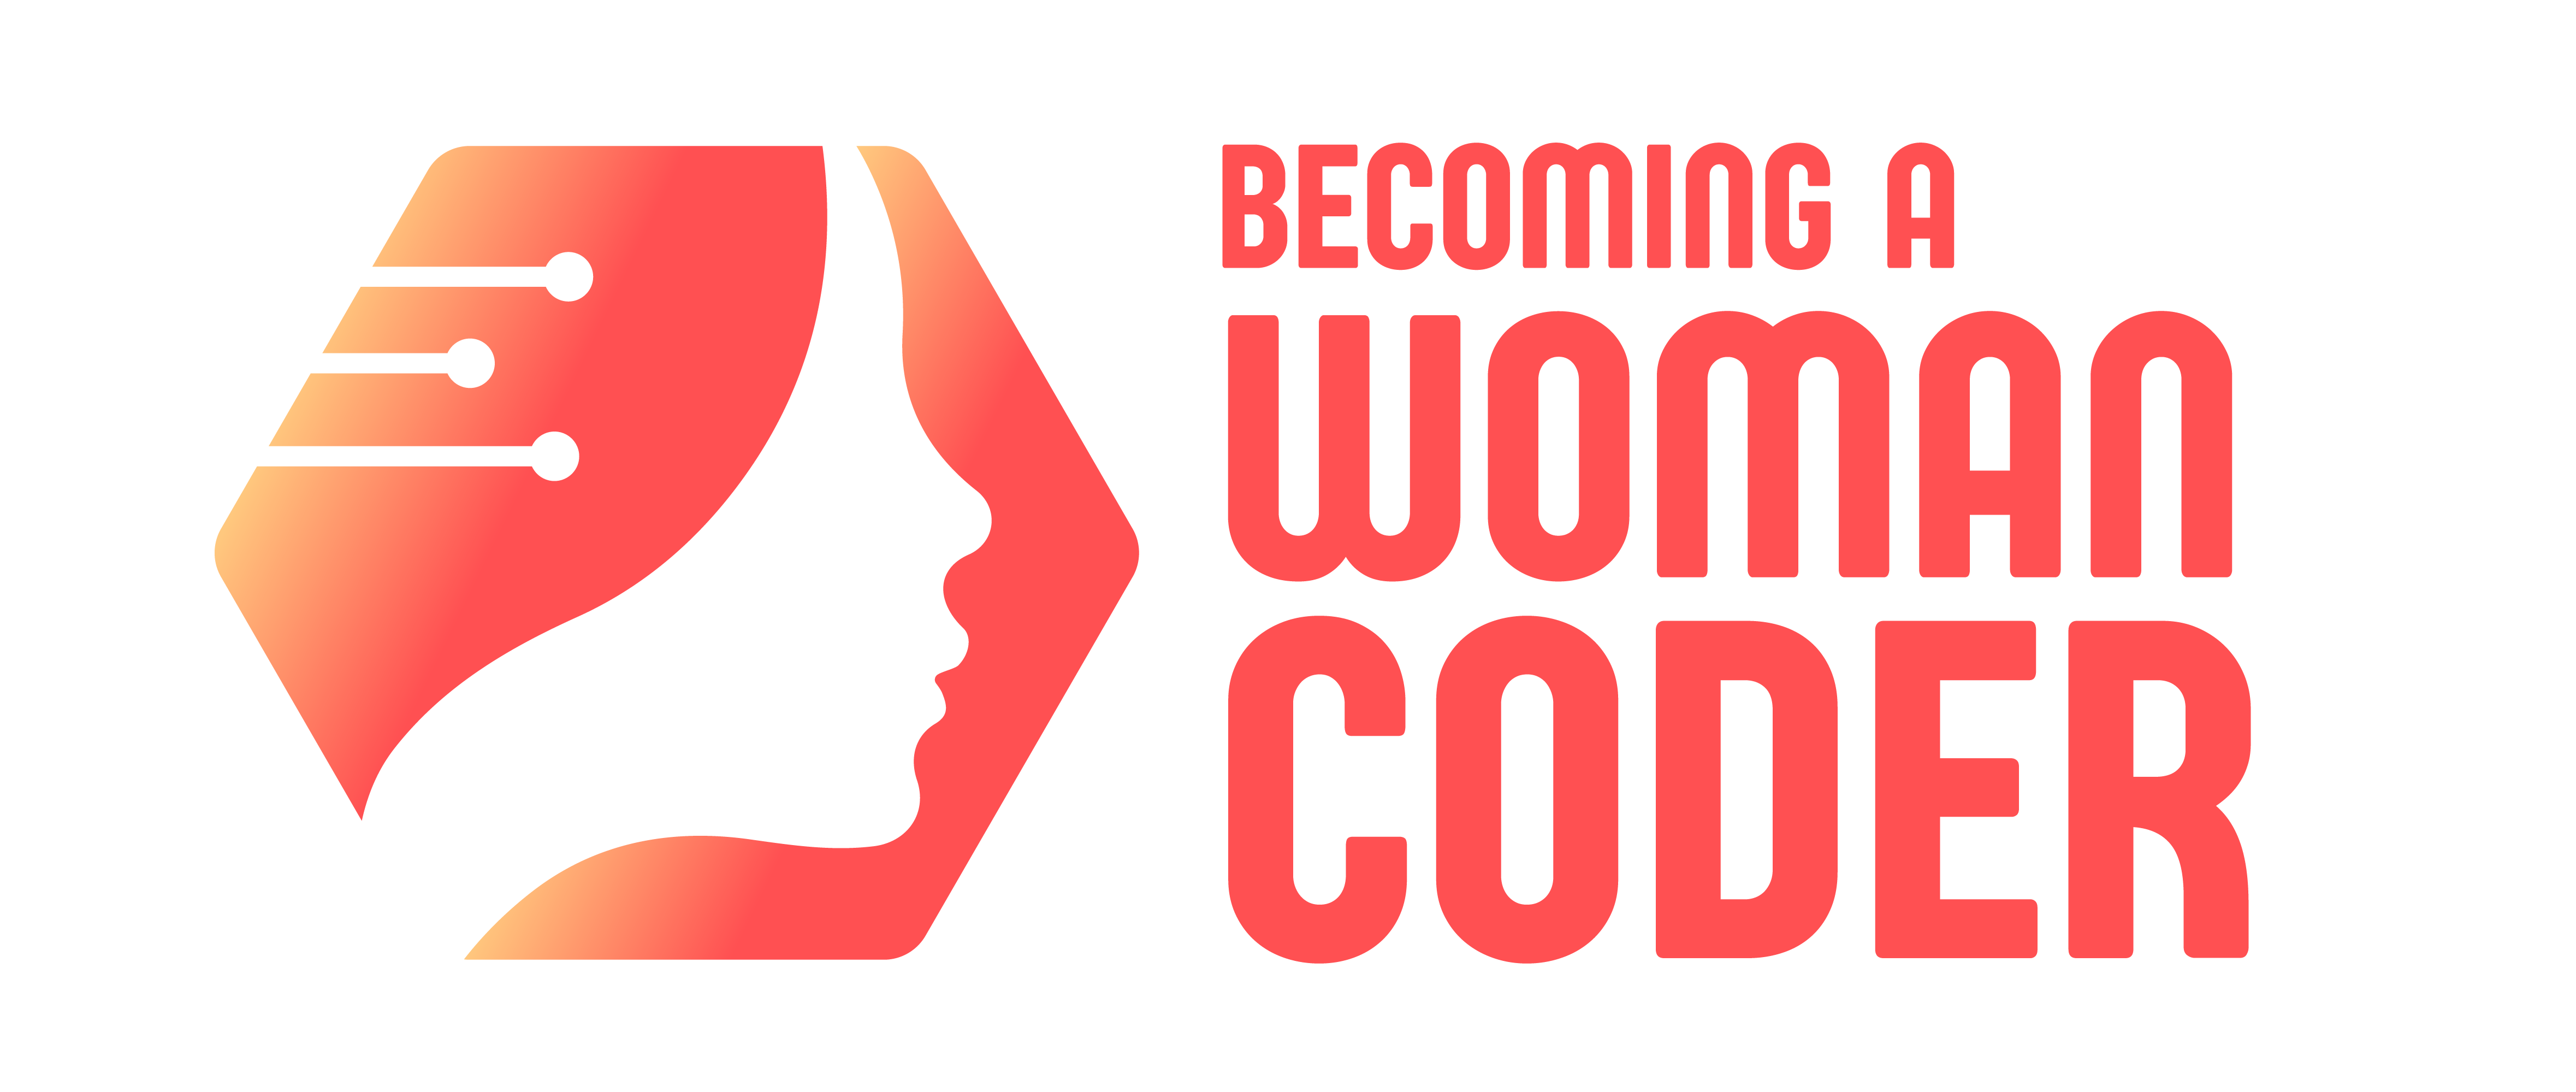 Becoming a Woman Coder